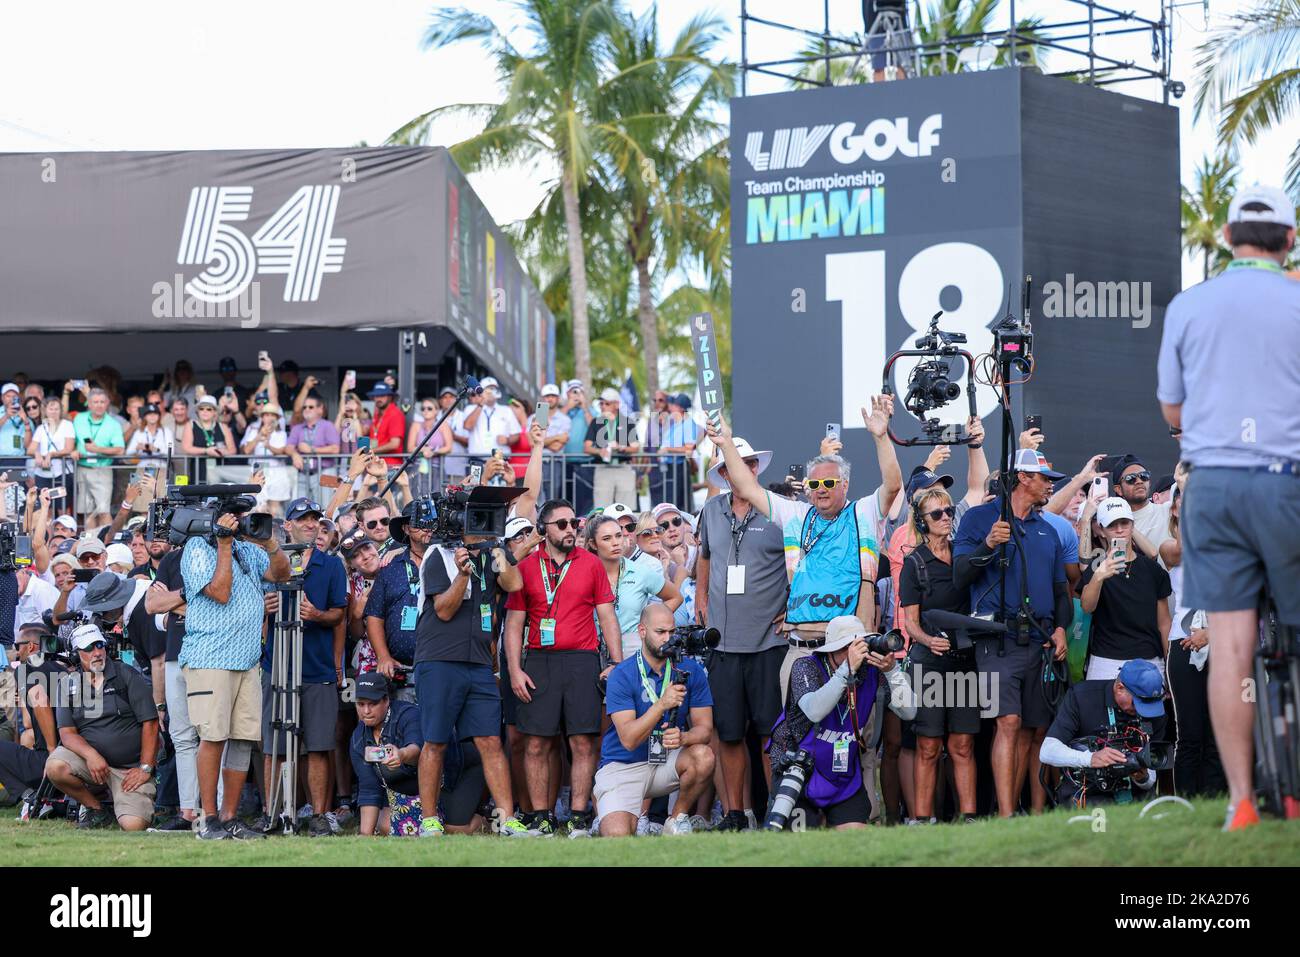 Miami, United States Of America. 30th Oct, 2022. DORAL, FLORIDA - OCTOBER 30: Fans watch play on the 18th green during the team championship stroke-play round of the LIV Golf Invitational - Miami at Trump National Doral Miami on October 30, 2022 in Doral, Florida. (Photo by Alberto E. Tamargo/Sipa USA) Credit: Sipa USA/Alamy Live News Stock Photo